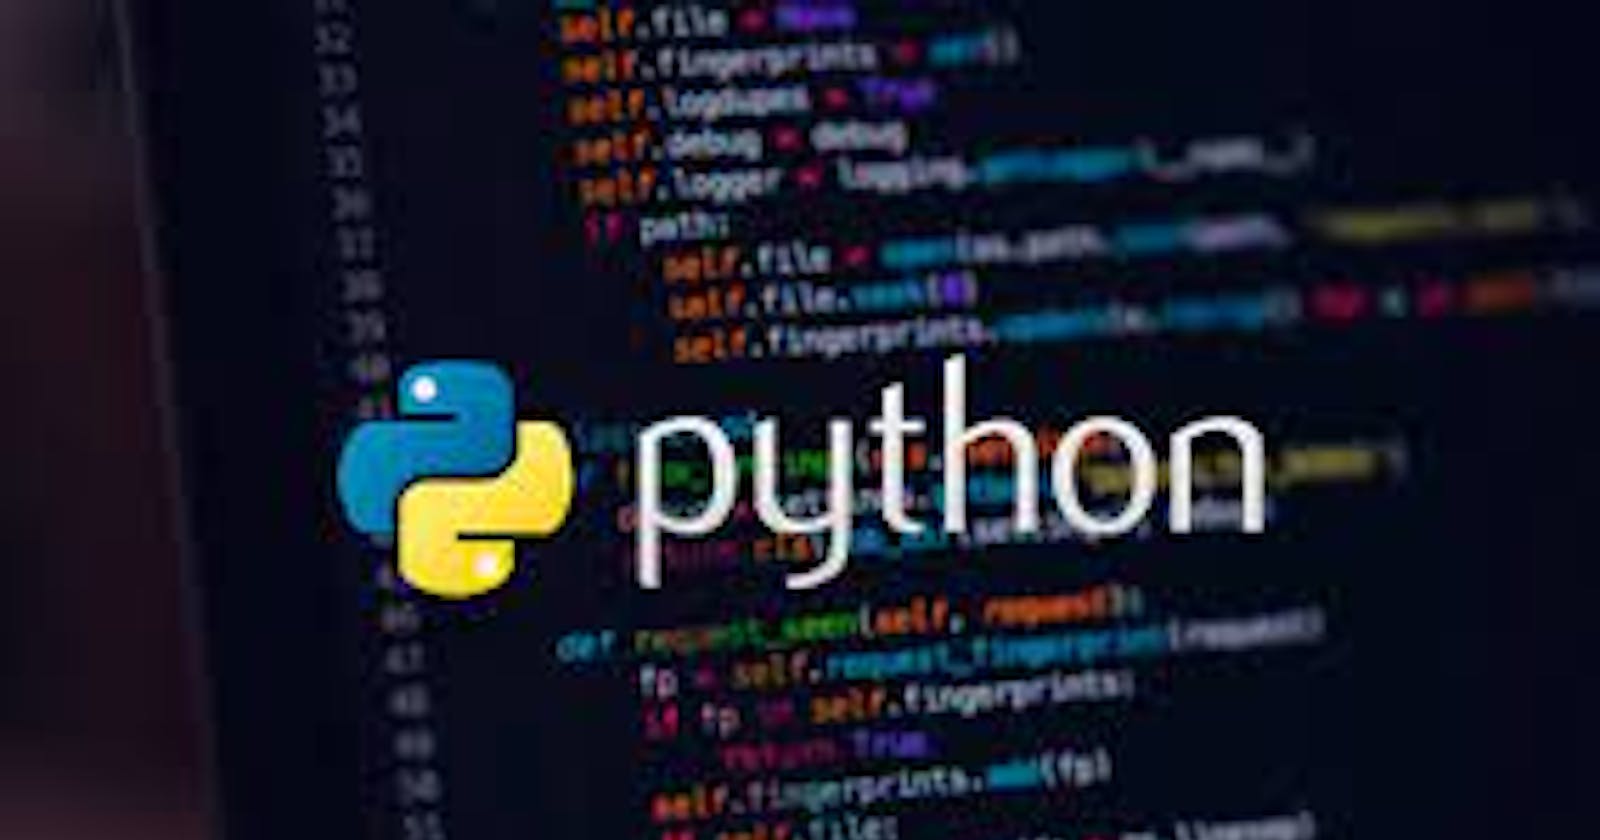 Setting up a dependency file in Python